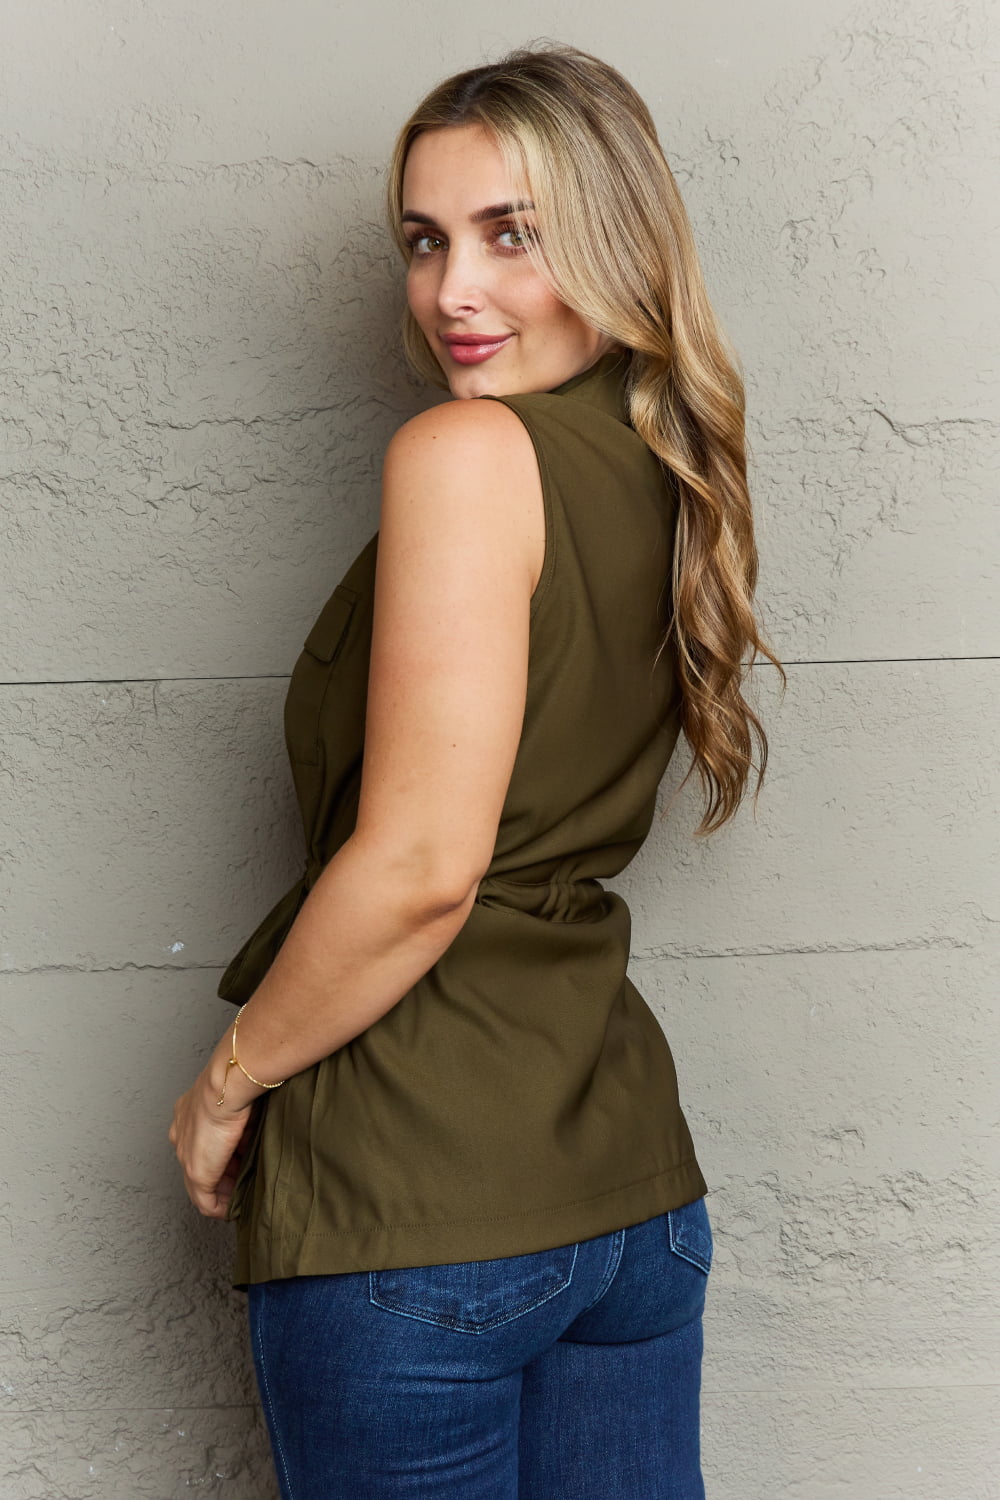 Follow The Light Sleeveless Collared Button Down Top - Camis & Tops - Shirts & Tops - 2 - 2024